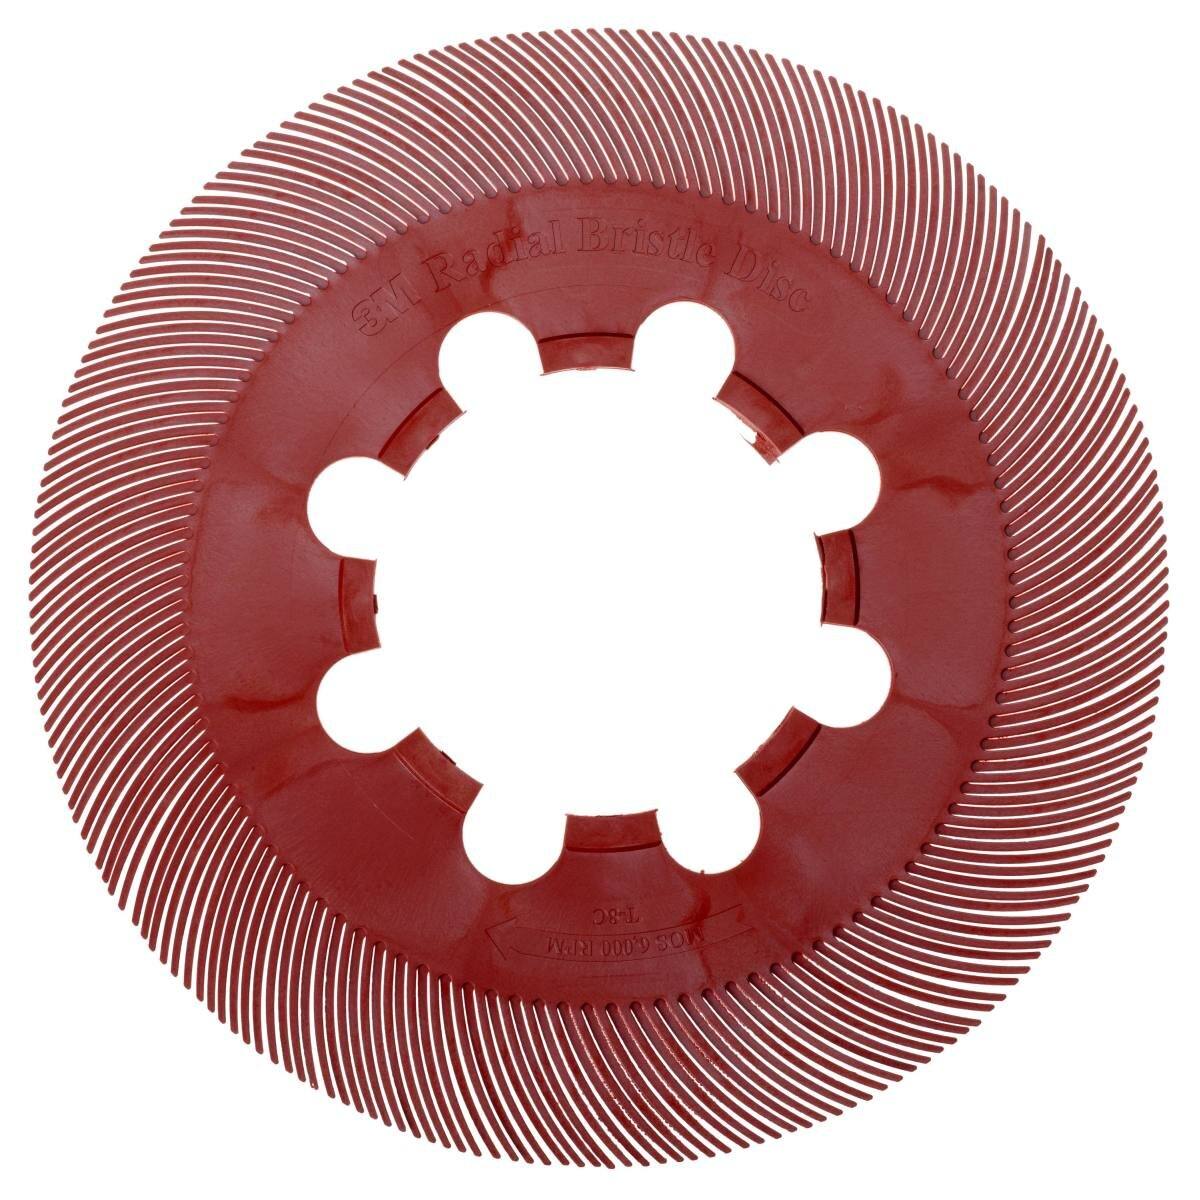 3M Scotch-Brite Radial single segments BB-ZB, red, 193.5 mm, P220, type C, pack=70 pieces